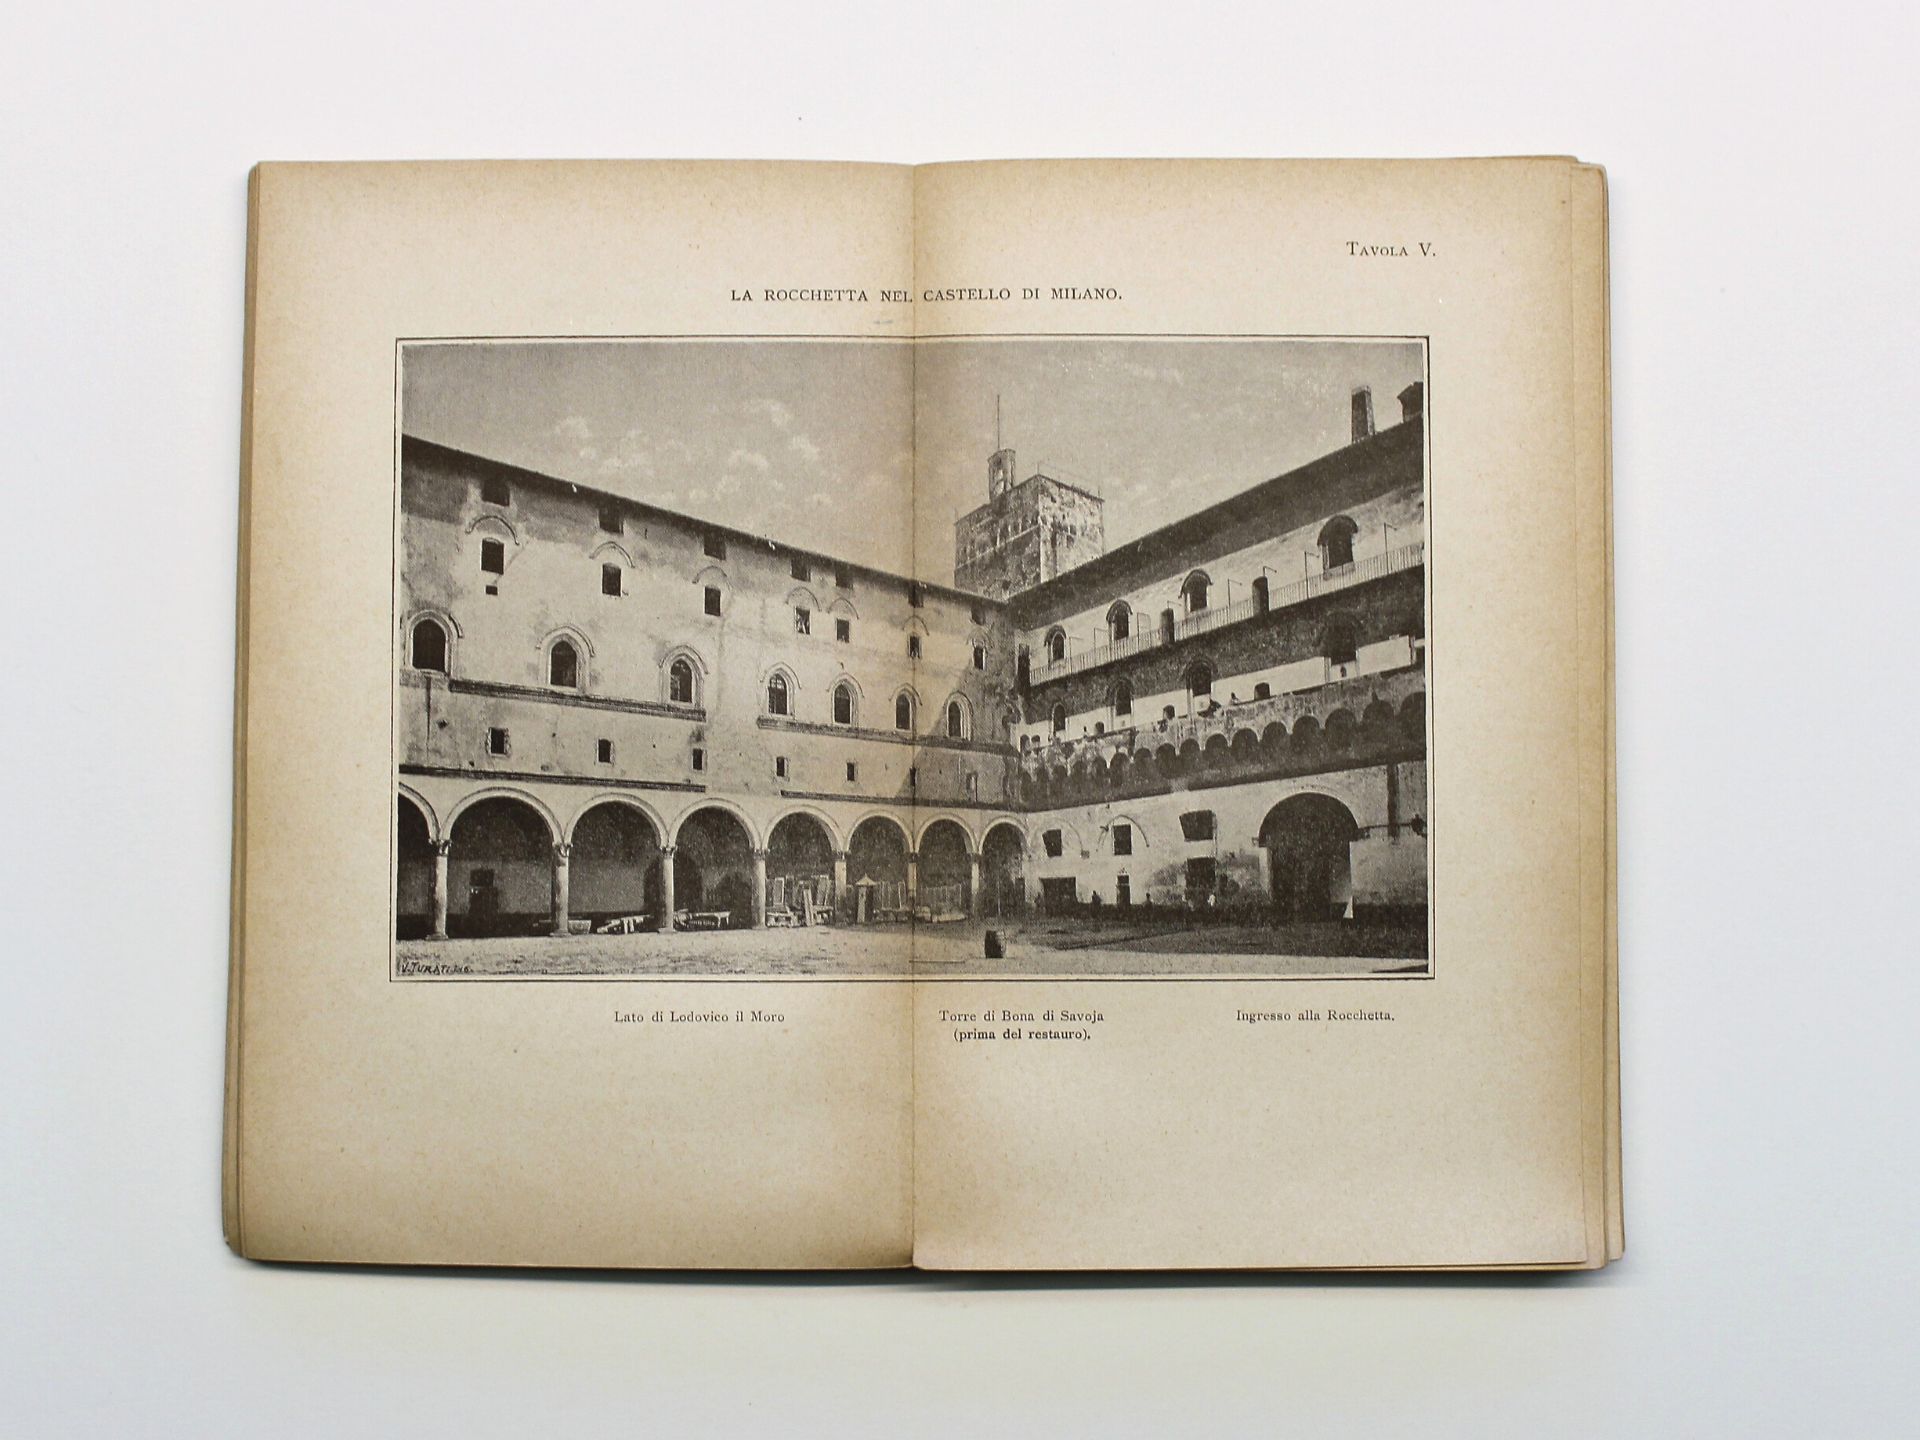 Historical guide of the Milan Castle